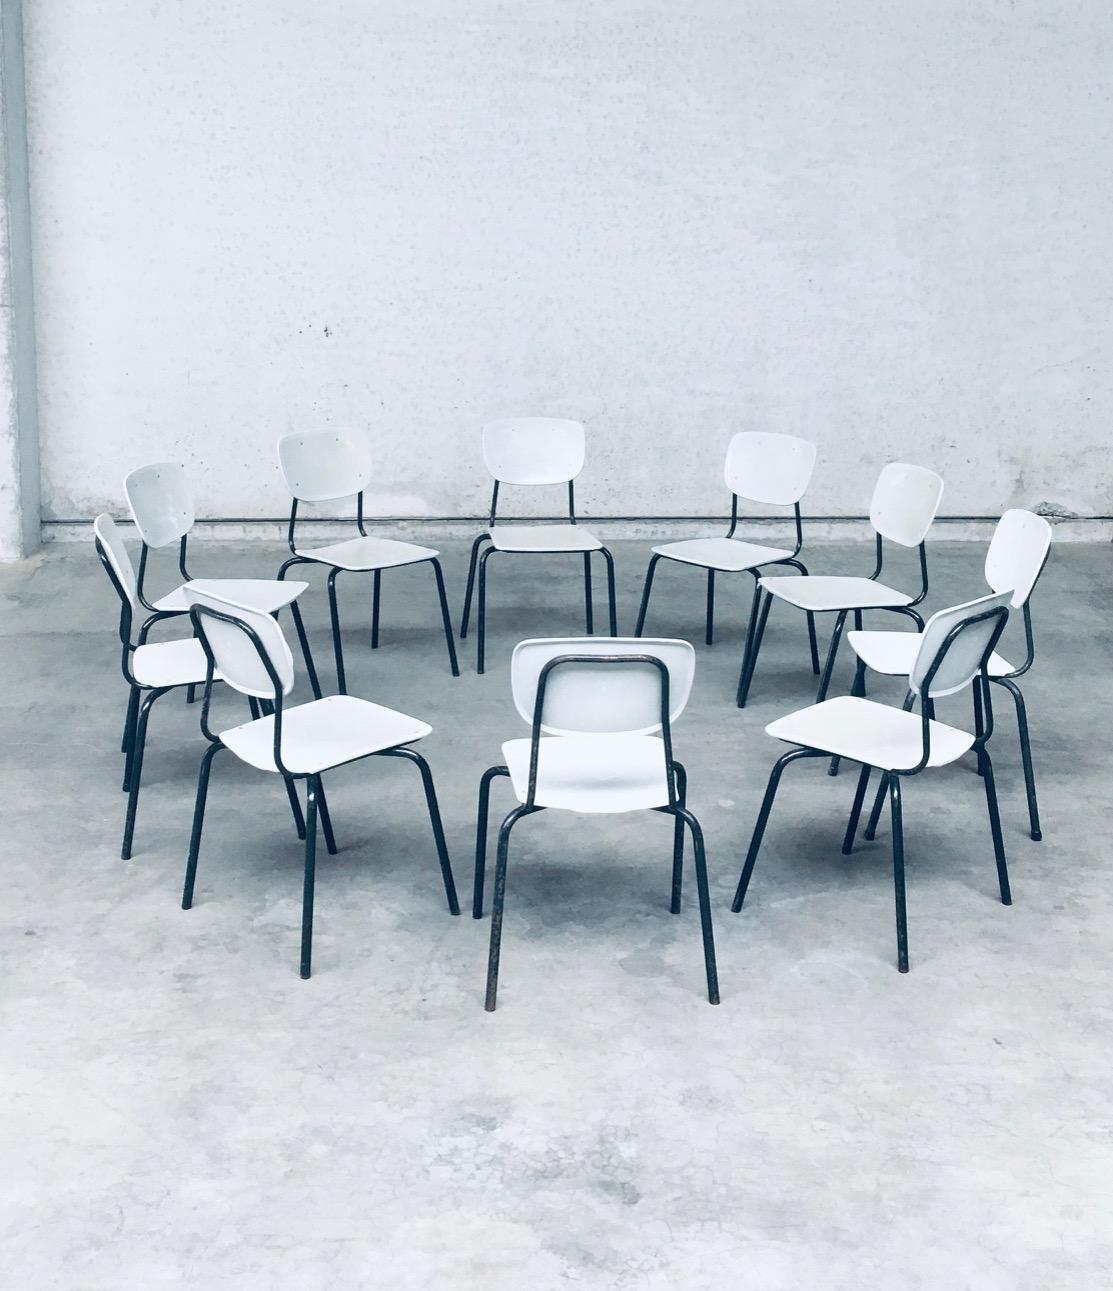 Mid-20th Century 1960's Dutch Industrial Design Stacking Chairs For Sale